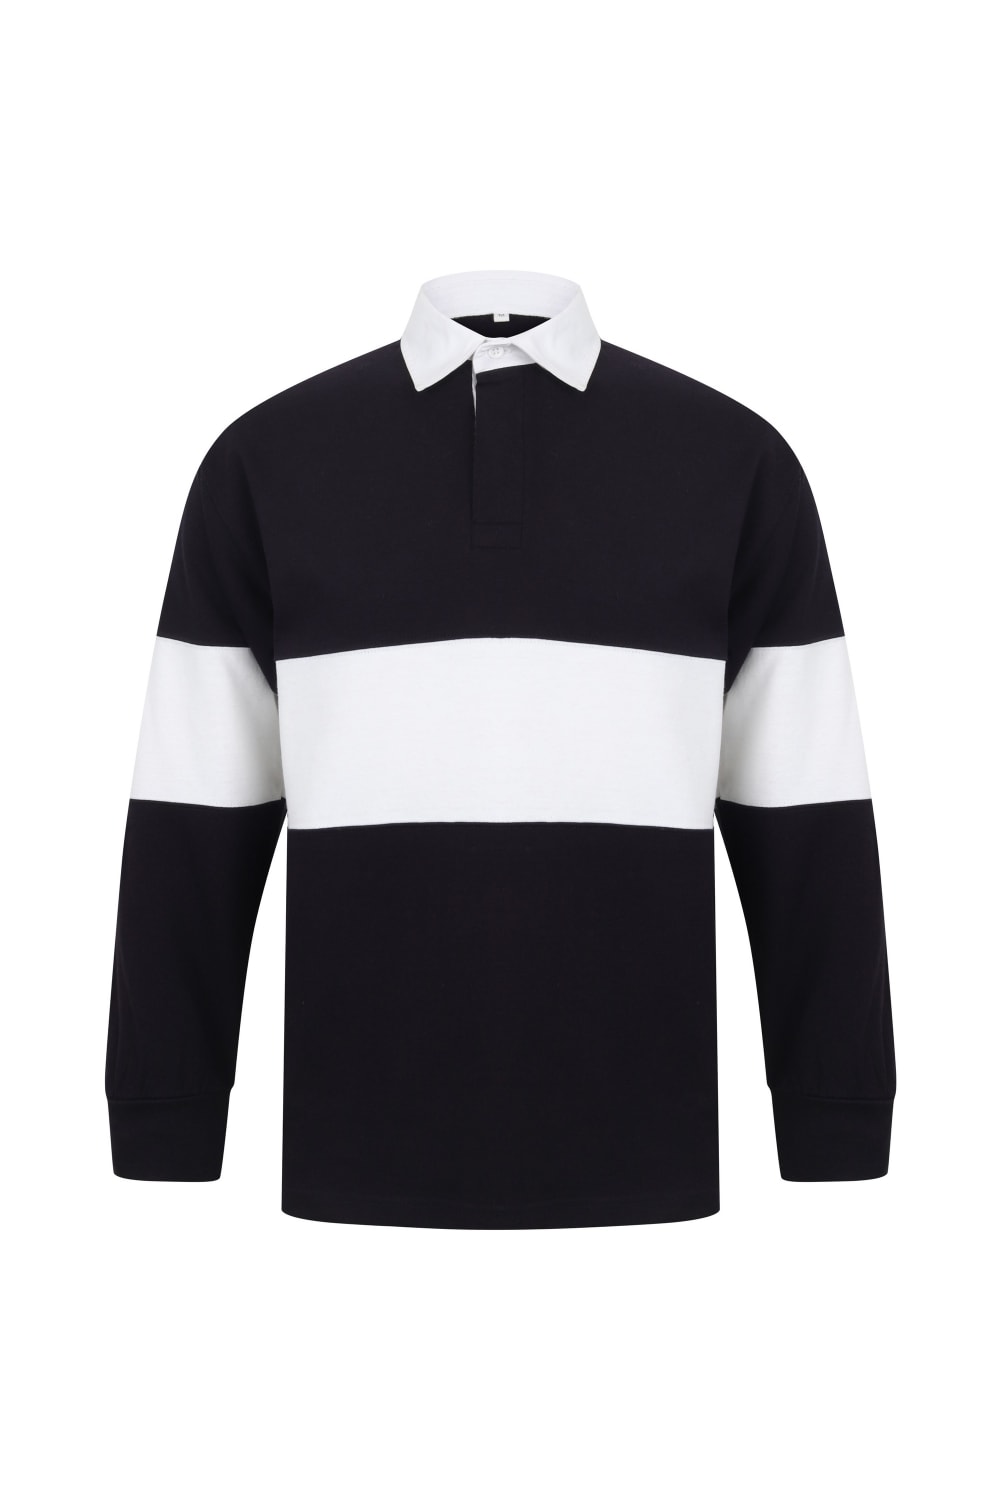 Front Row Adults Unisex Panelled Tag Free Rugby Shirt (Navy/White)